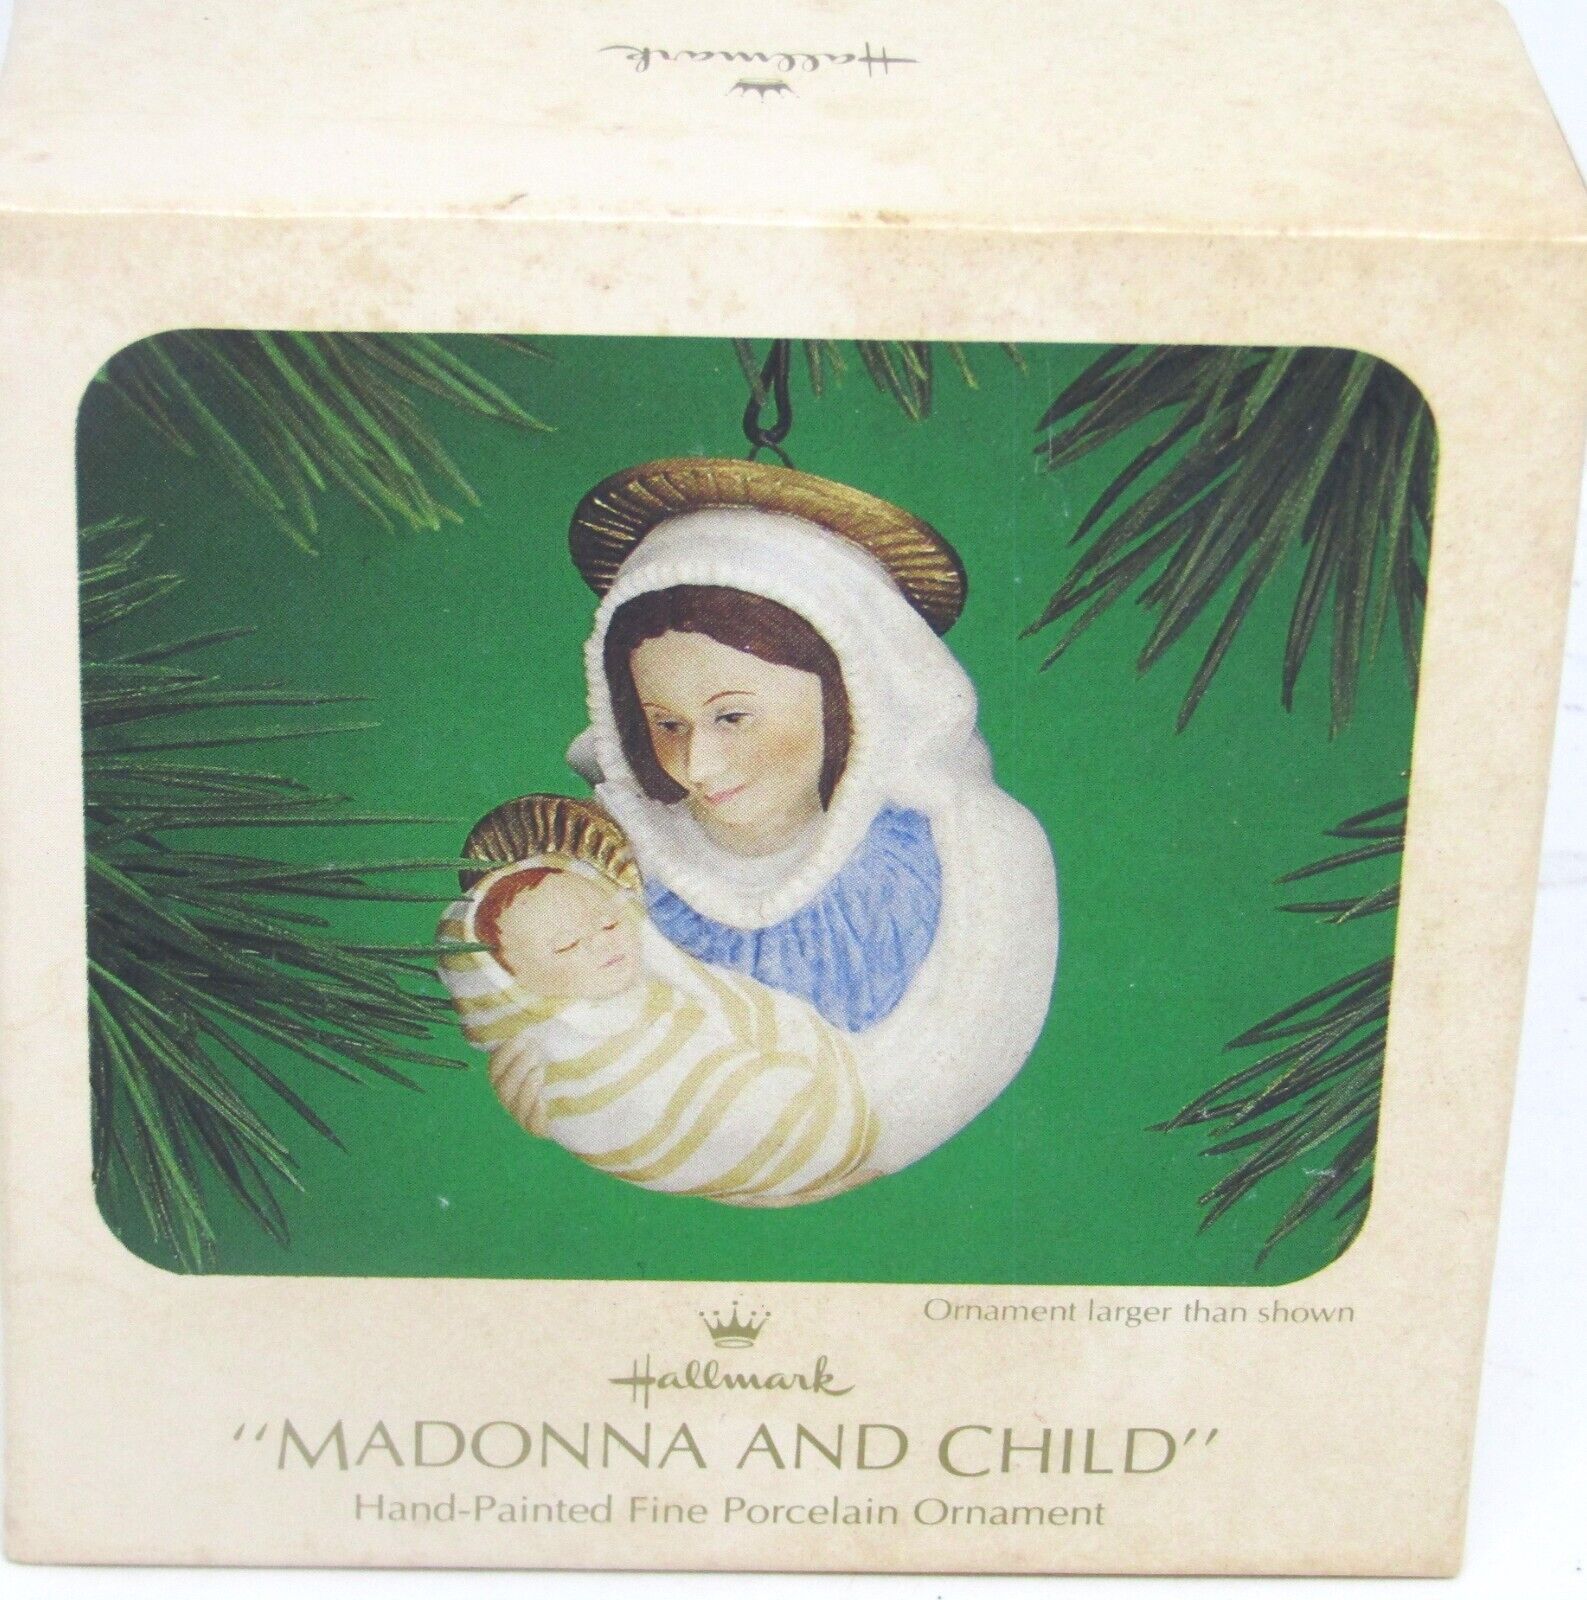 Hallmark 1983 MADONNA AND CHILD Christmas Ornament Hand Painted Porcelain